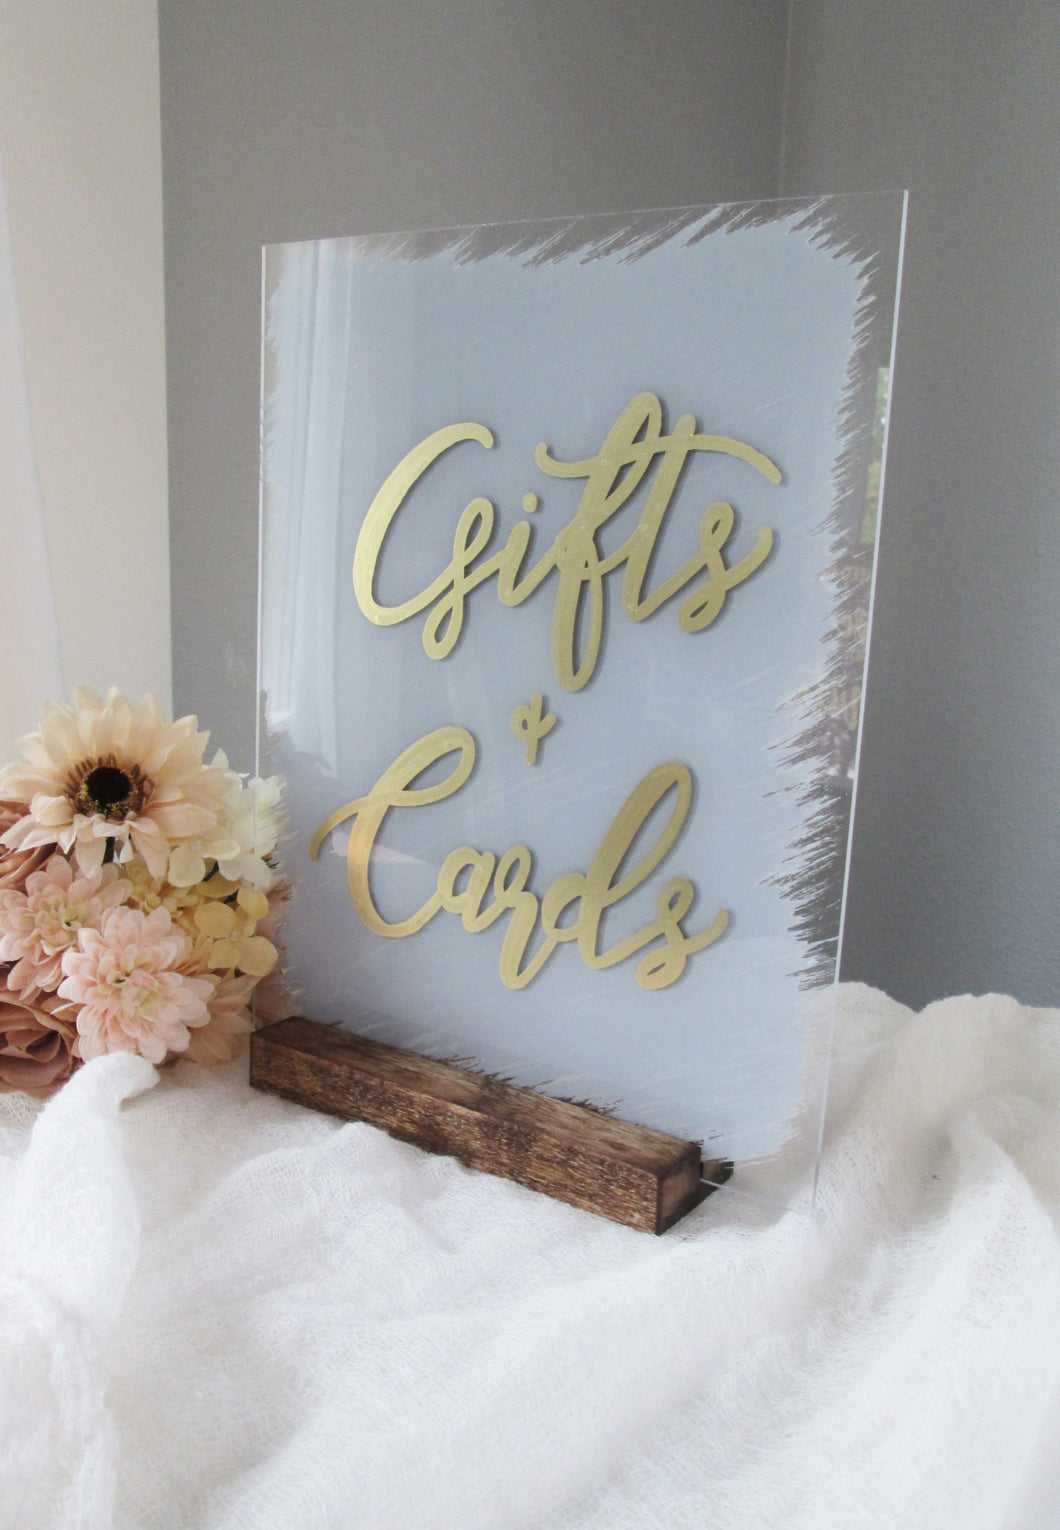 Gifts and Cards Acrylic Wedding Sign with Stand